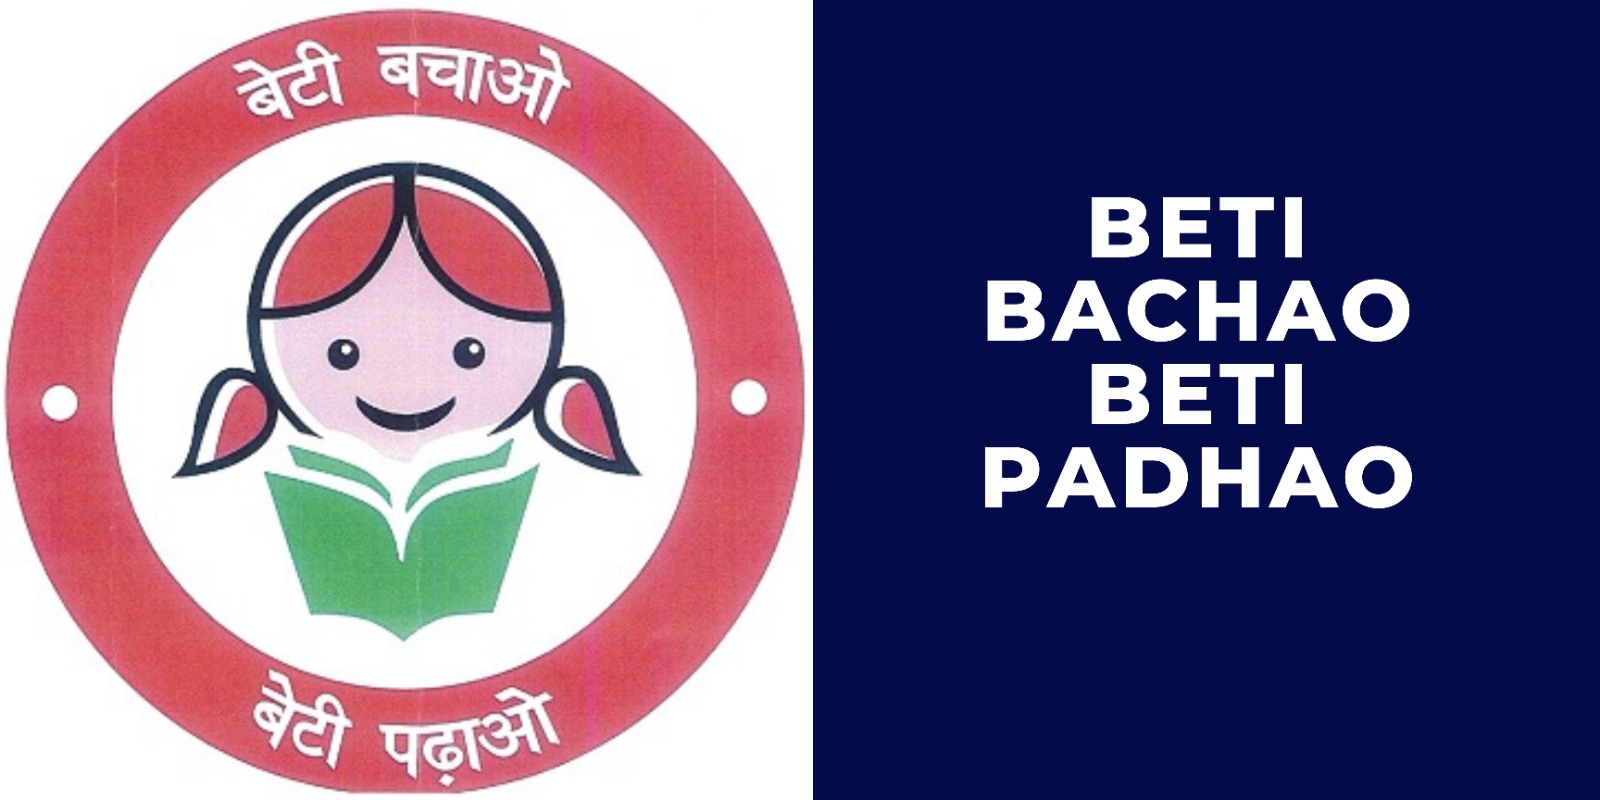 How to draw Beti Bachao Beti Padhao drawing step by step - YouTube